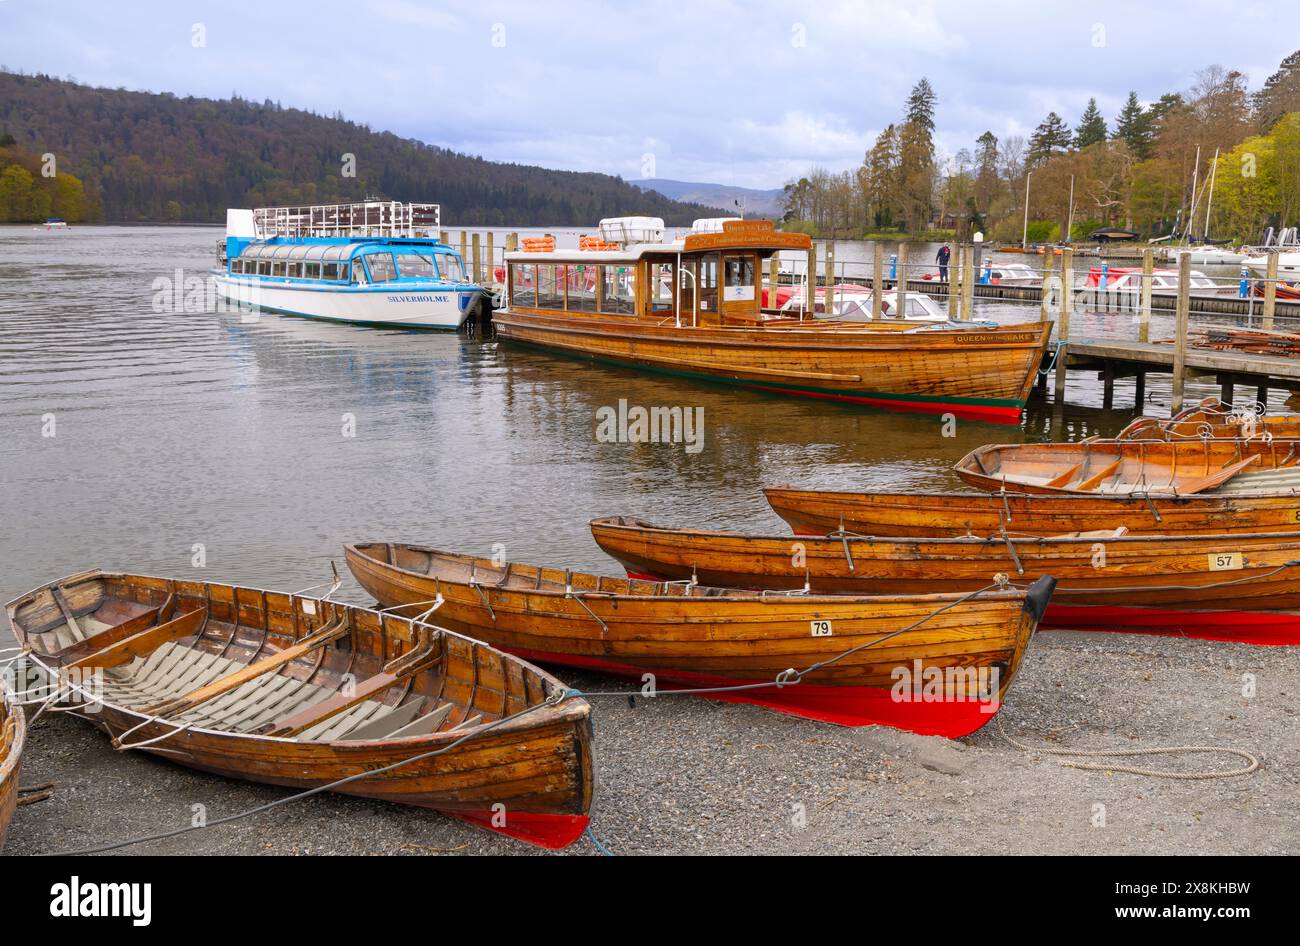 Shoreline in Bowness-on-Windermere on Lake Windermere, a popular tourist destination for a lake cruise, Lake District, Cumbria, England, Great Britain Stock Photo